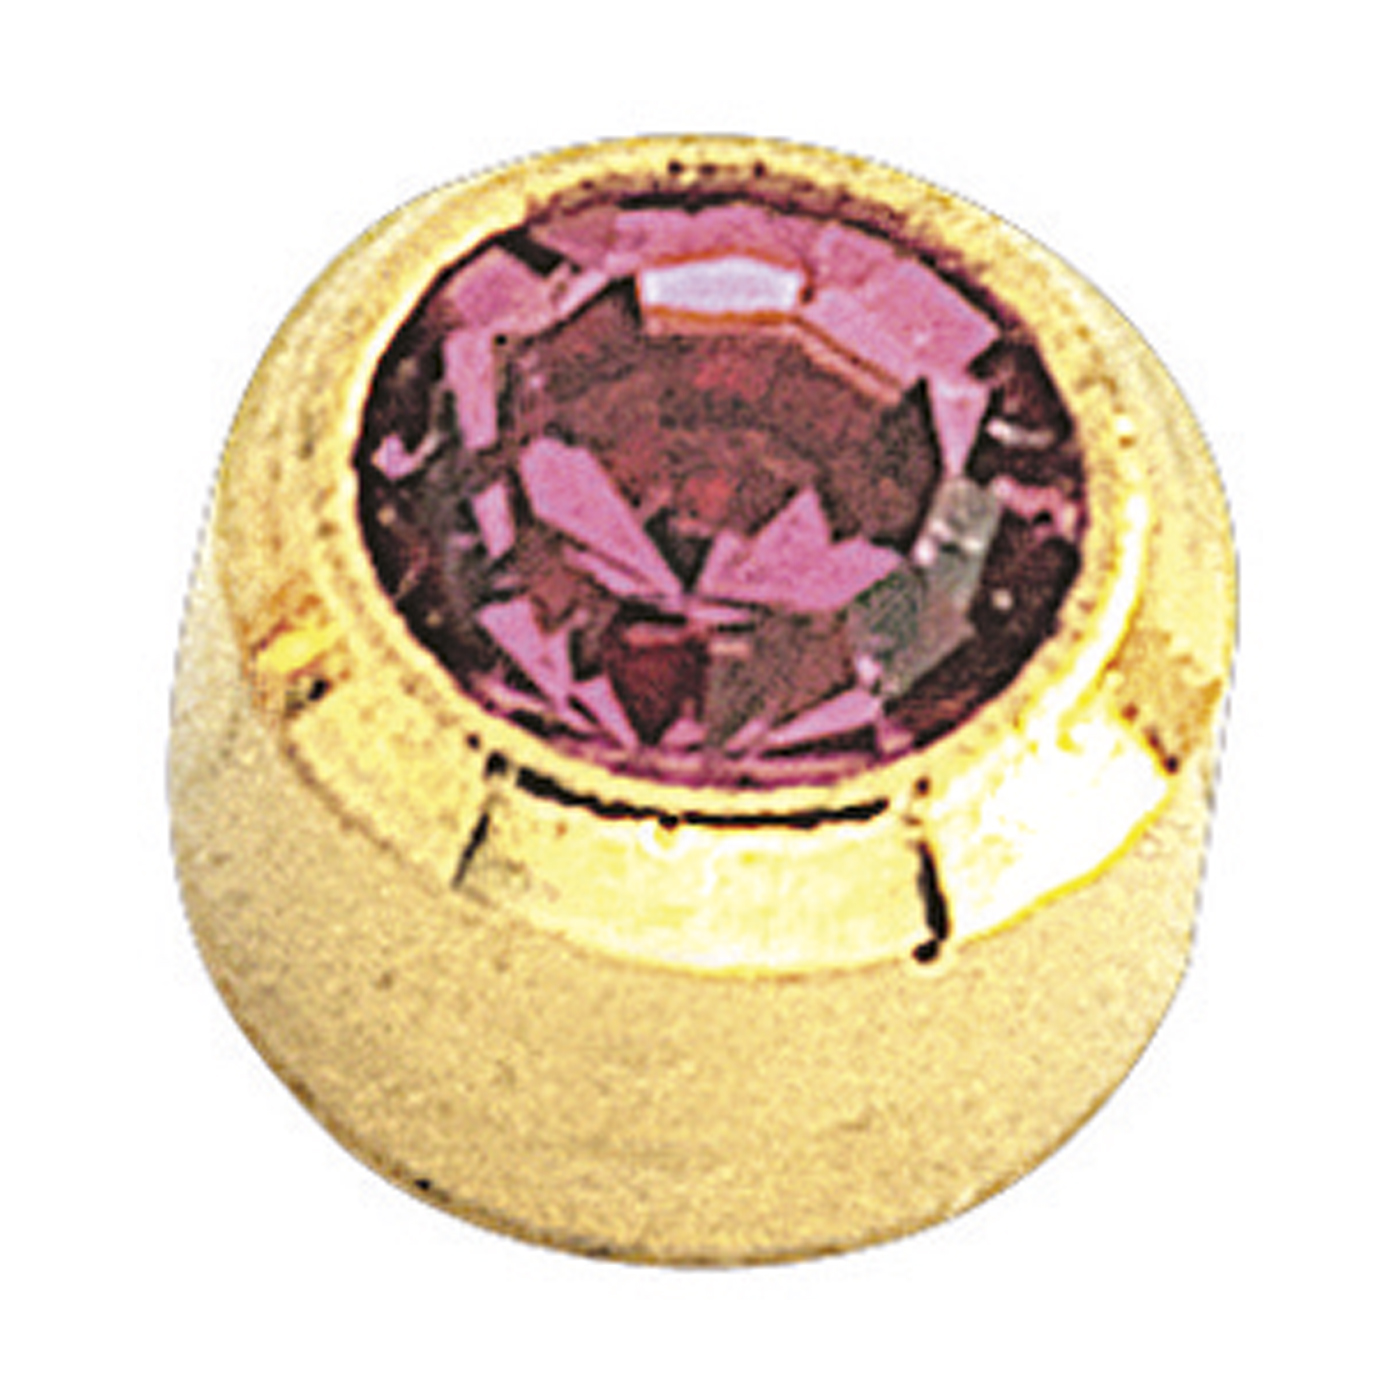 Plus System First Studs, Gold-Plated, Zircon Rosé, ø 3.95 mm - 12 x 2 pieces